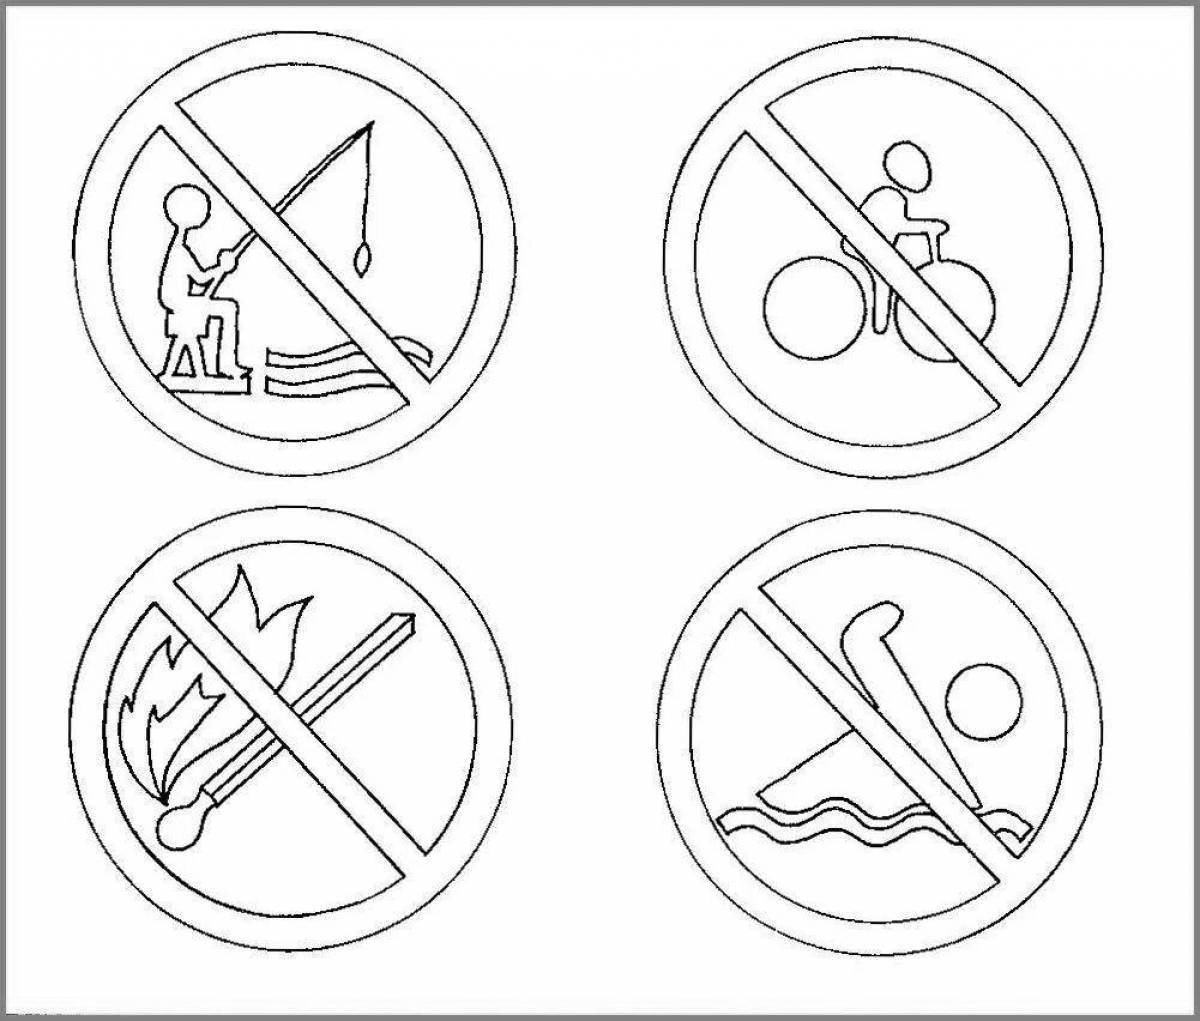 Exquisite prohibition sign coloring page